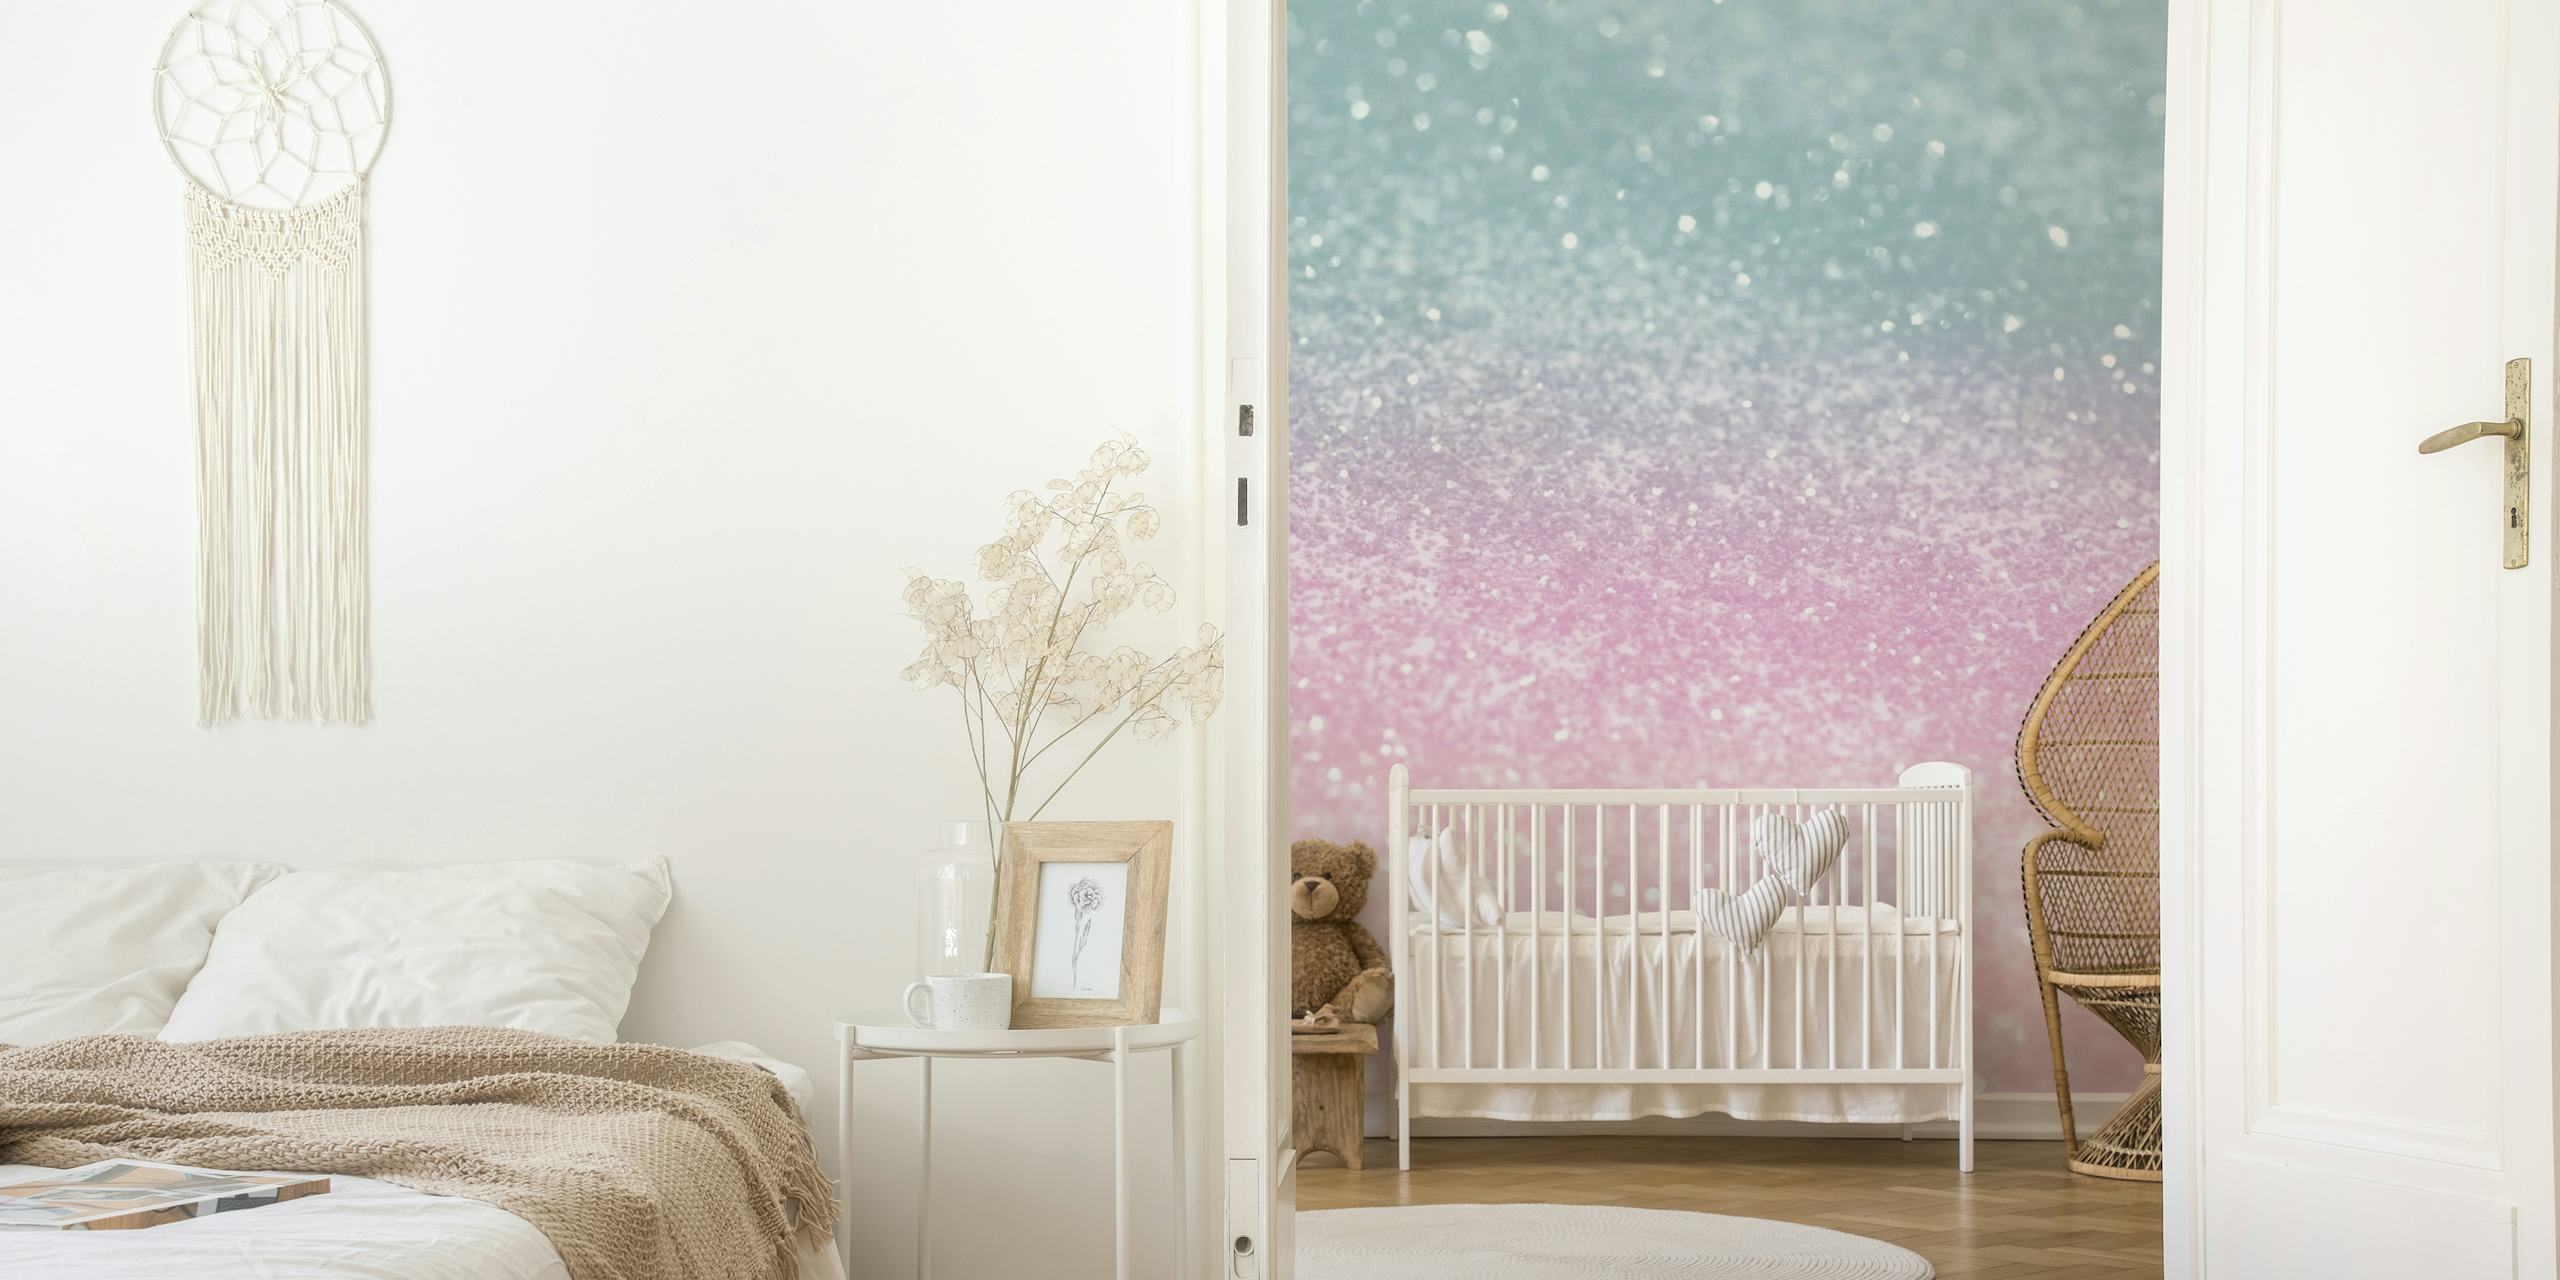 Gradient glitter wall mural transitioning from turquoise to pink with a sparkling effect